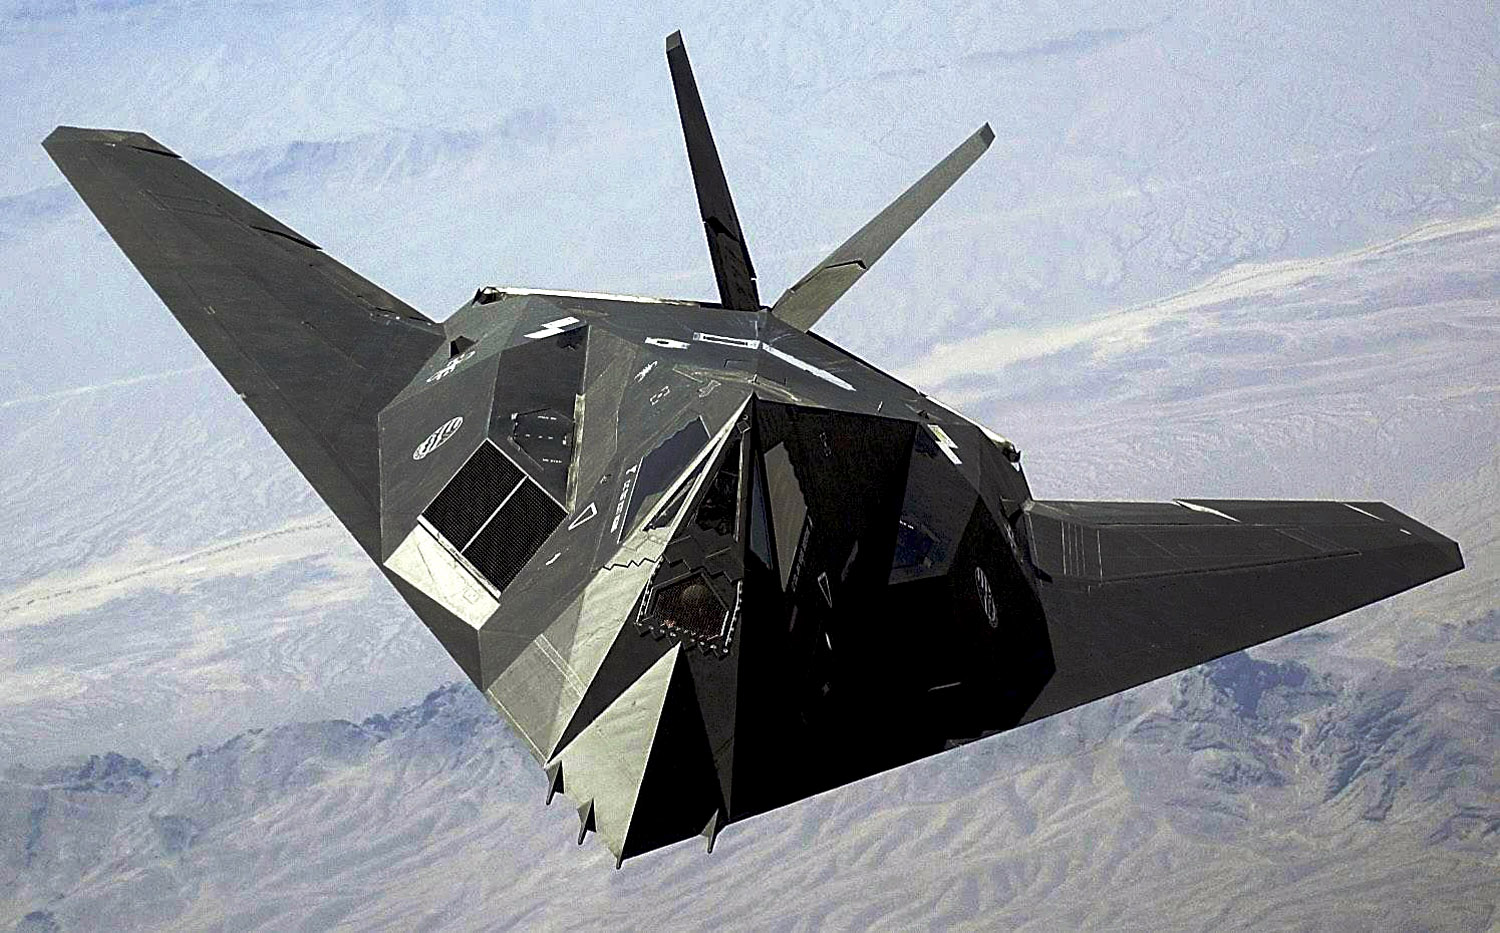 F-117 "Black Jet" stealthy attack aircraft